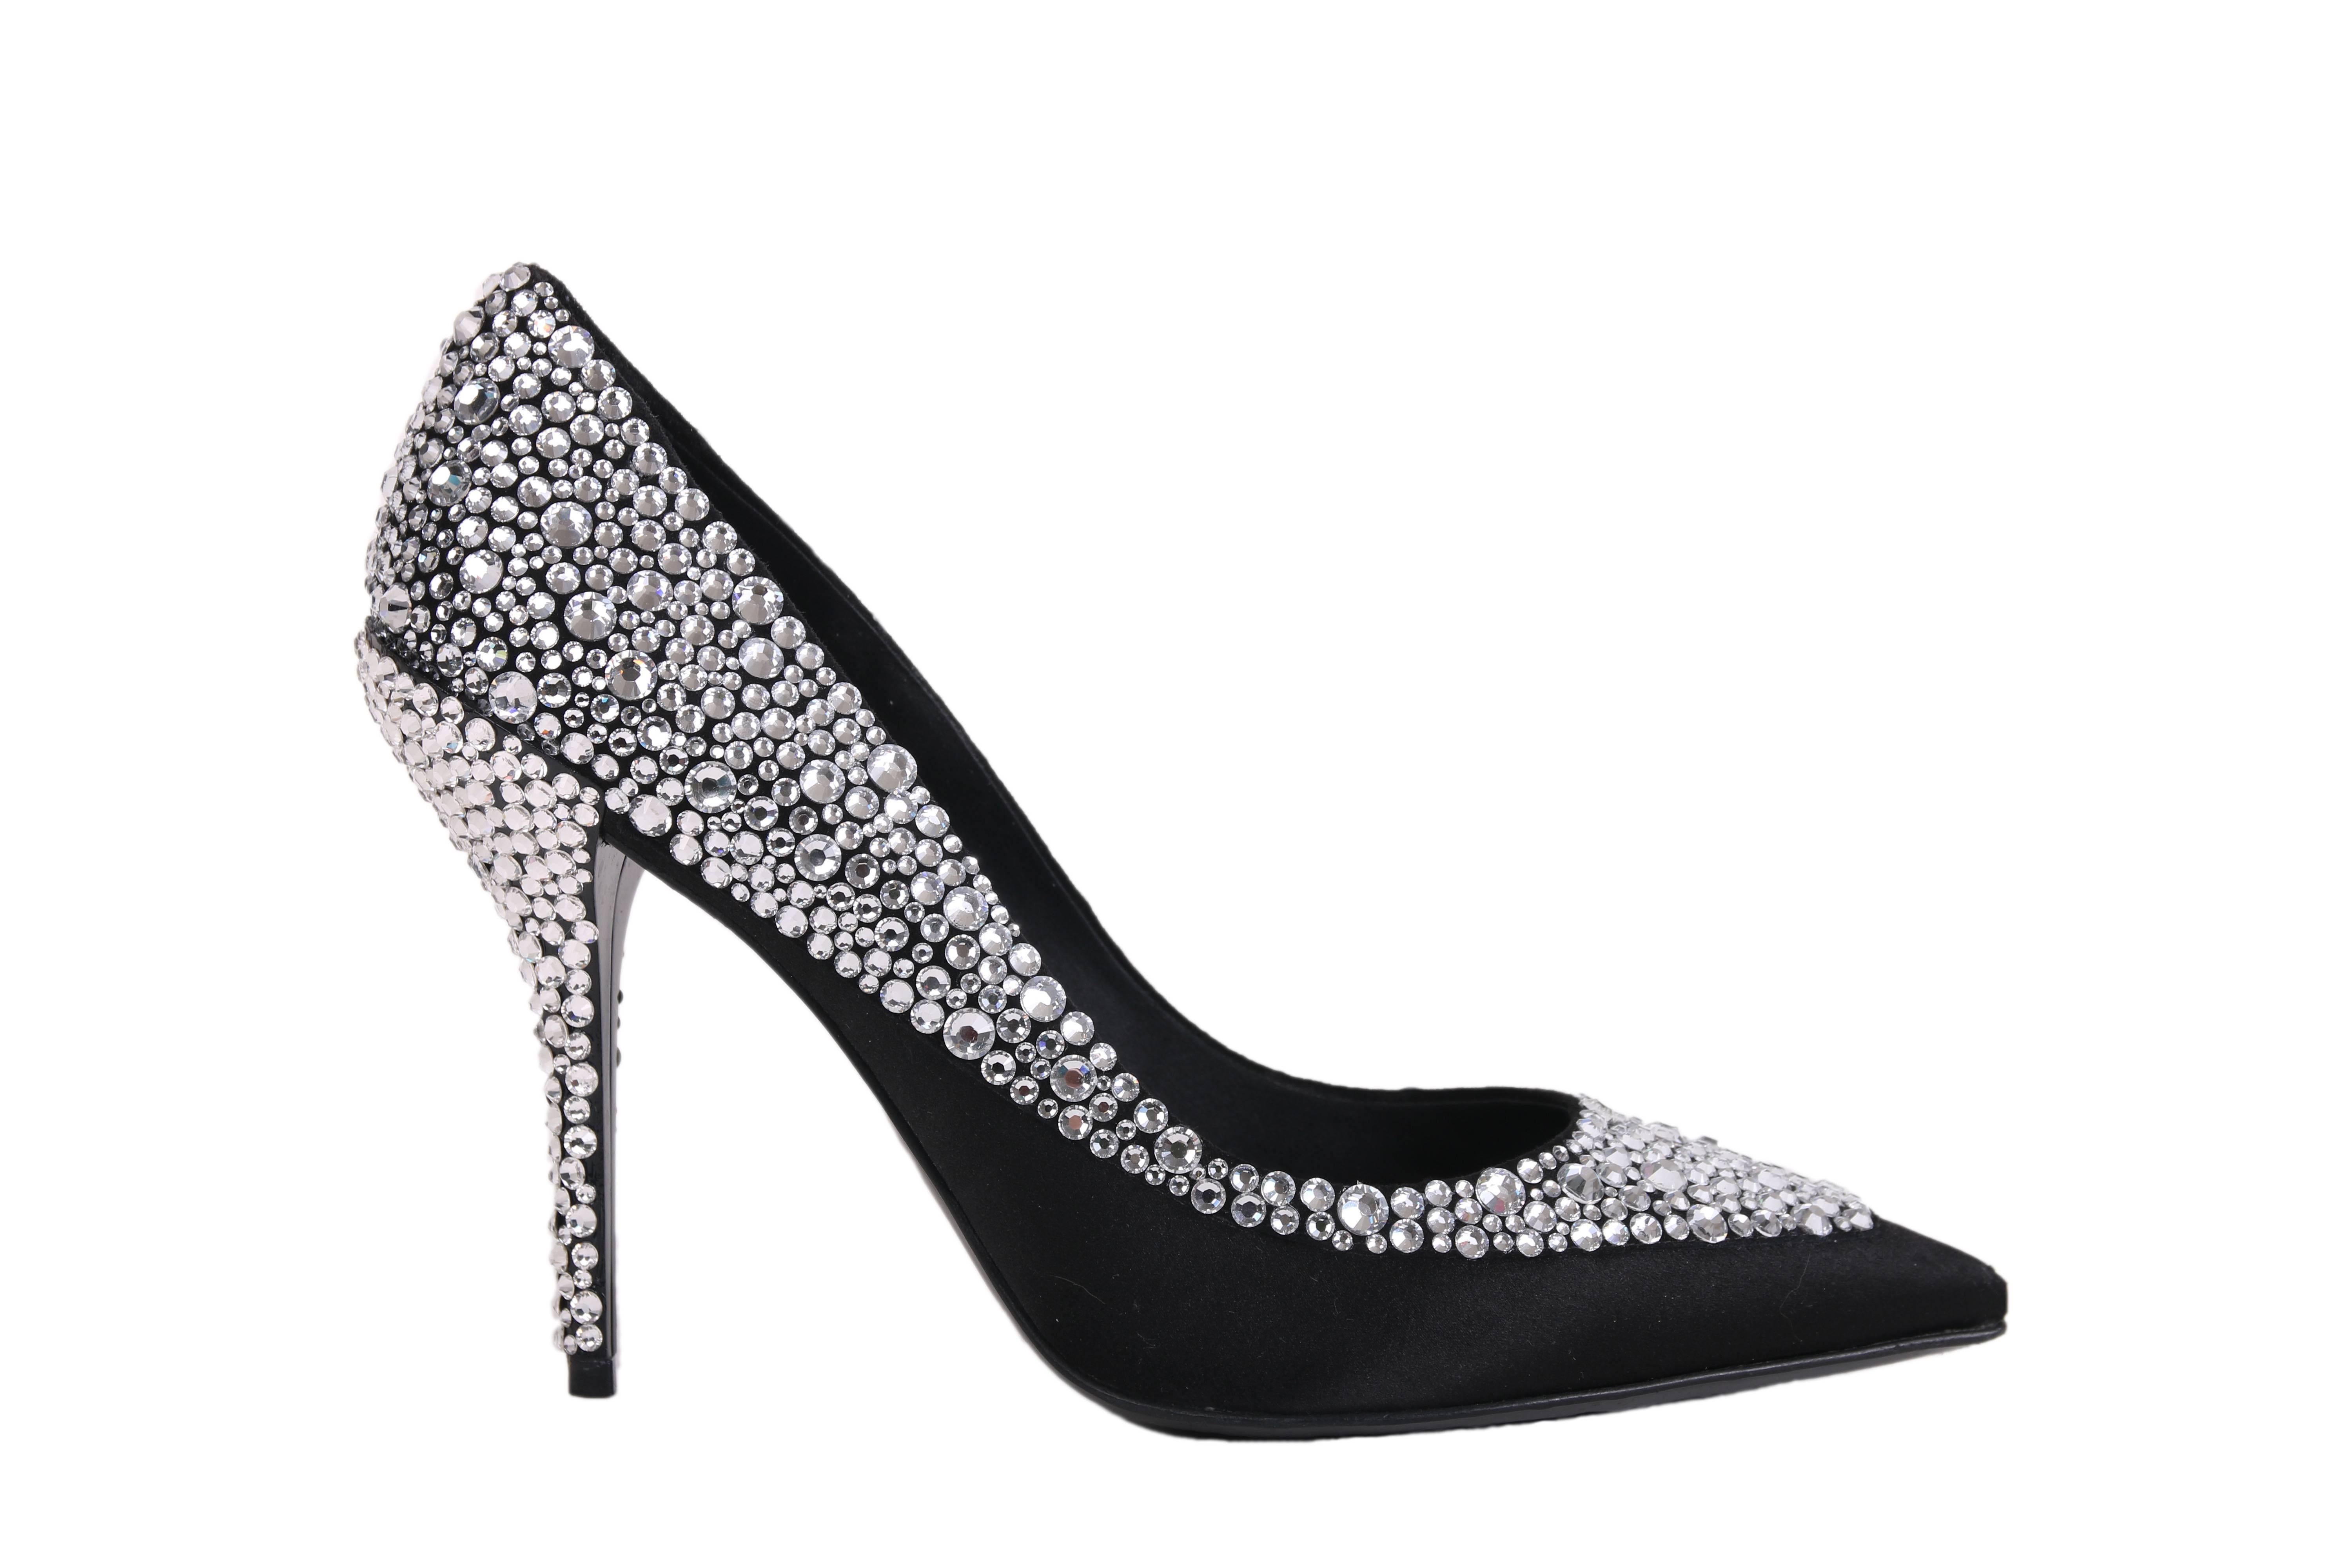 Roger Vivier black satin crystal encrusted heels with pointed toe and 3